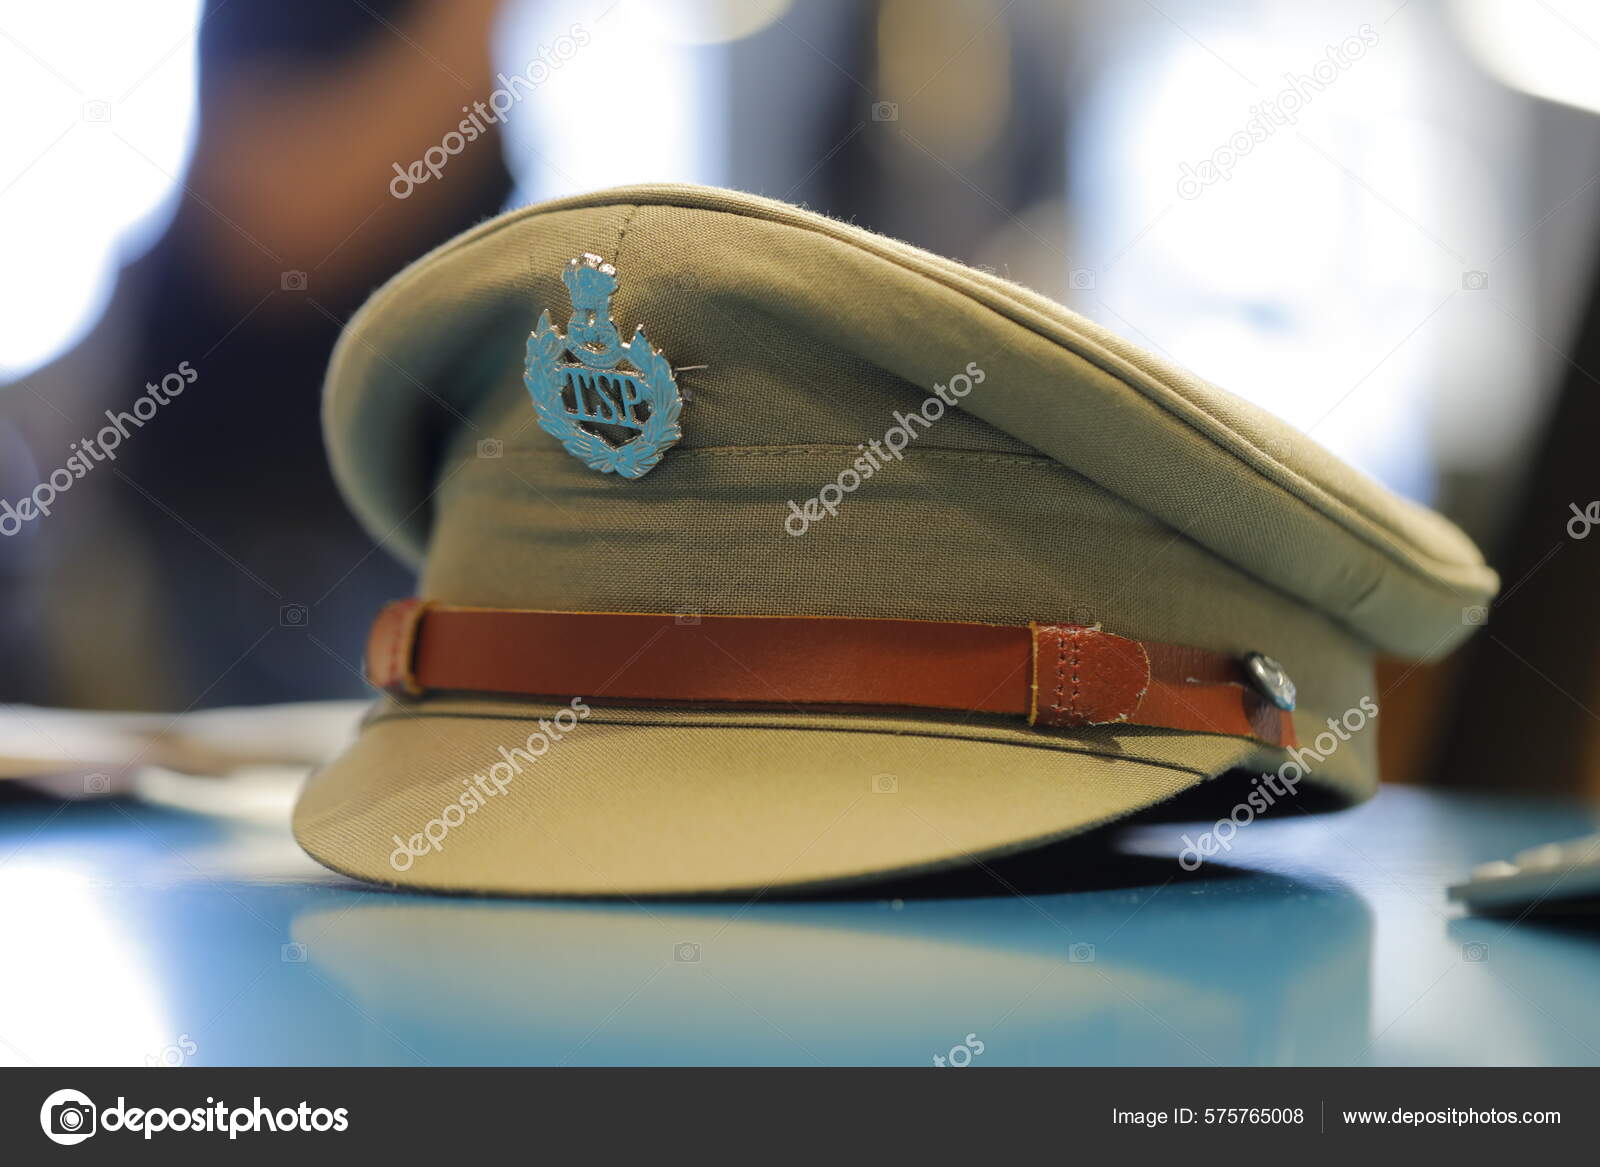 Indian police Stock Photos, Royalty Free Indian police Images |  Depositphotos